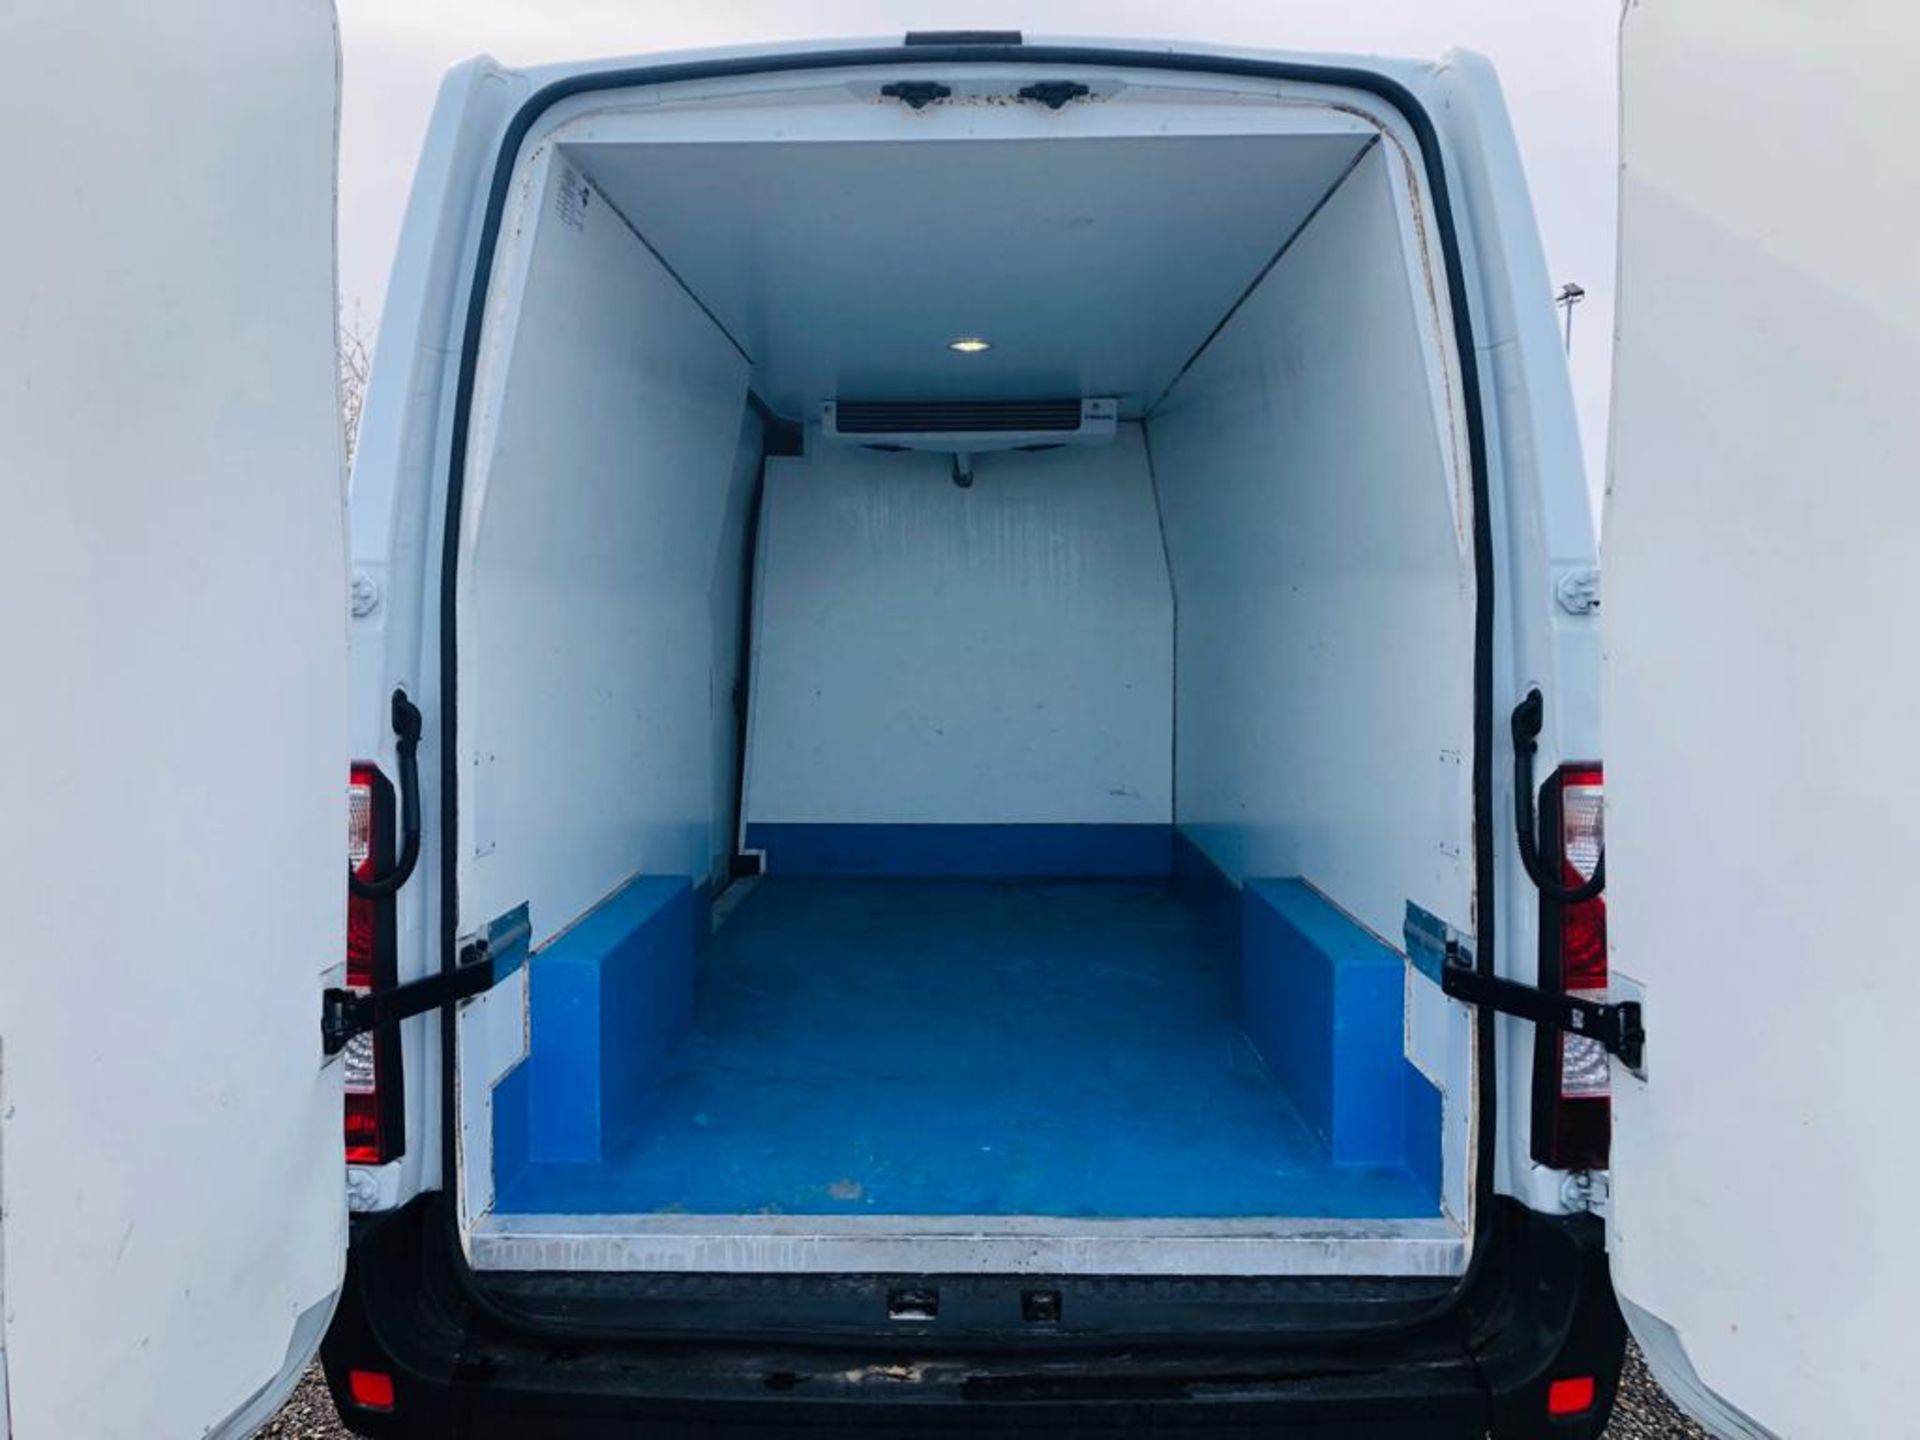 Renault Master 2.3 DCI 110 Business LM35 L3 H2 2016 '16 reg' Fridge/Freezer - Fully Insulated - Image 11 of 28